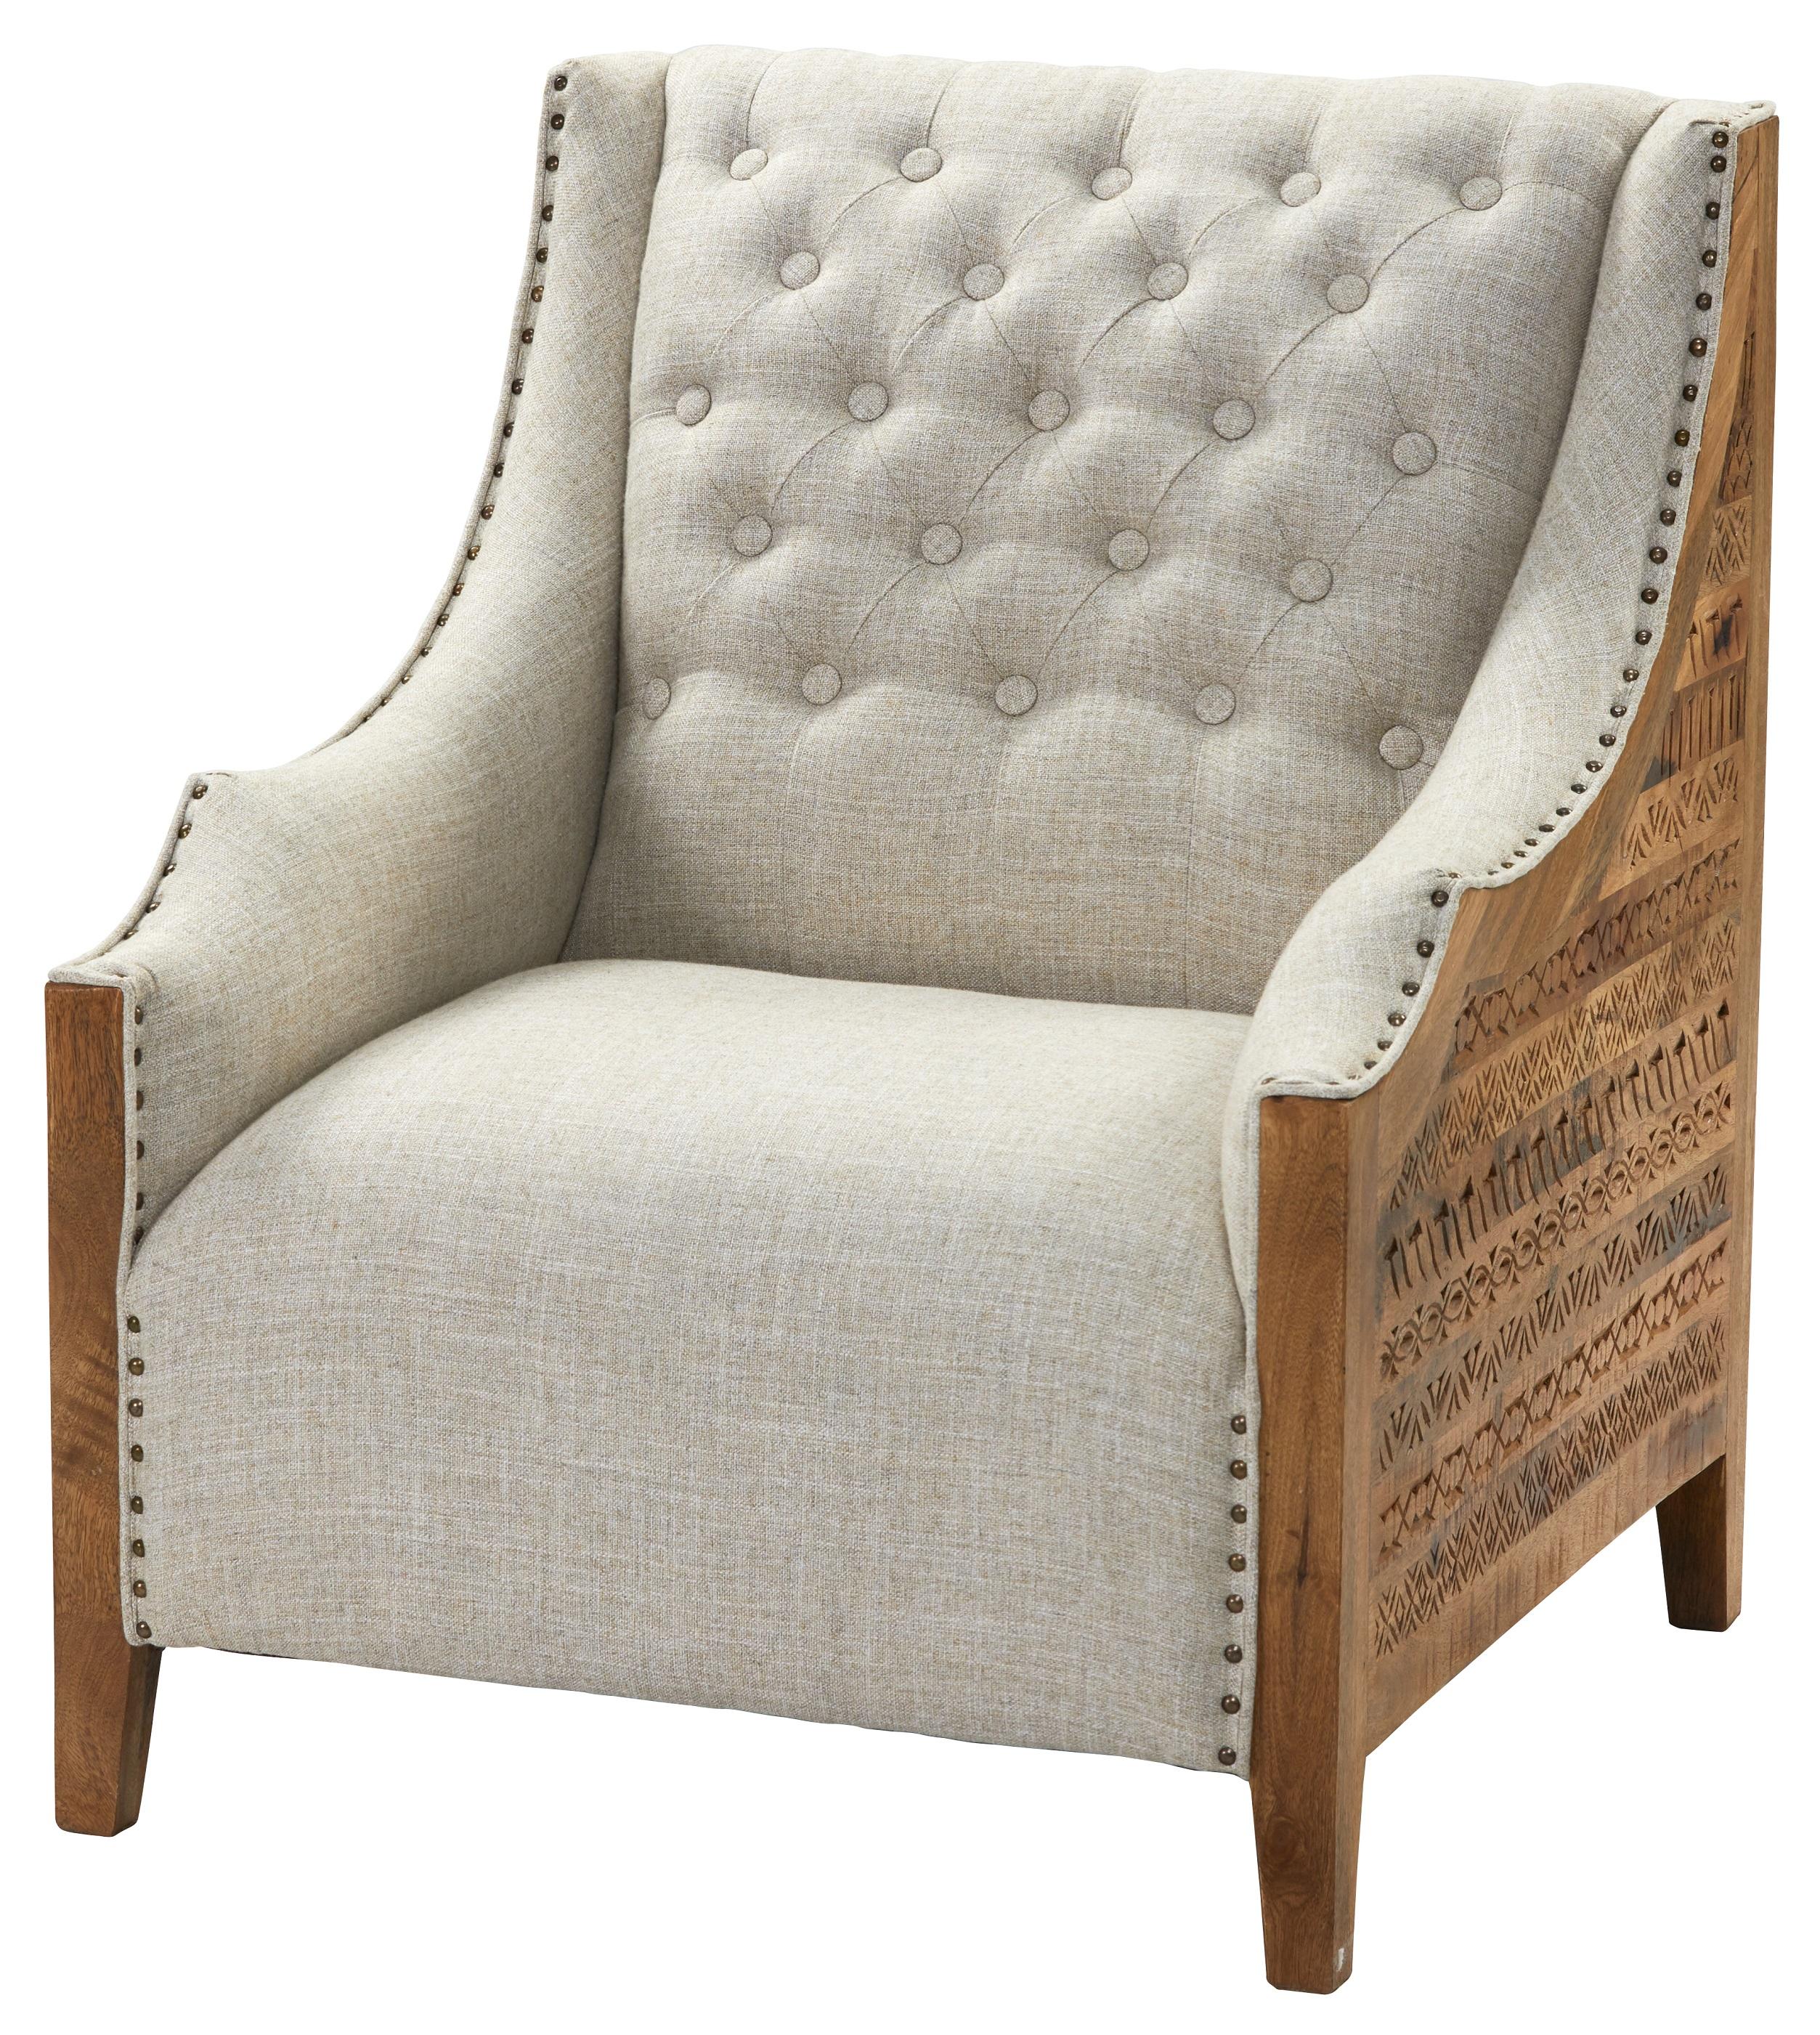 Transitional Chair CAC-51014 Elijah CAC-51014 in Oak, Ivory Polyester